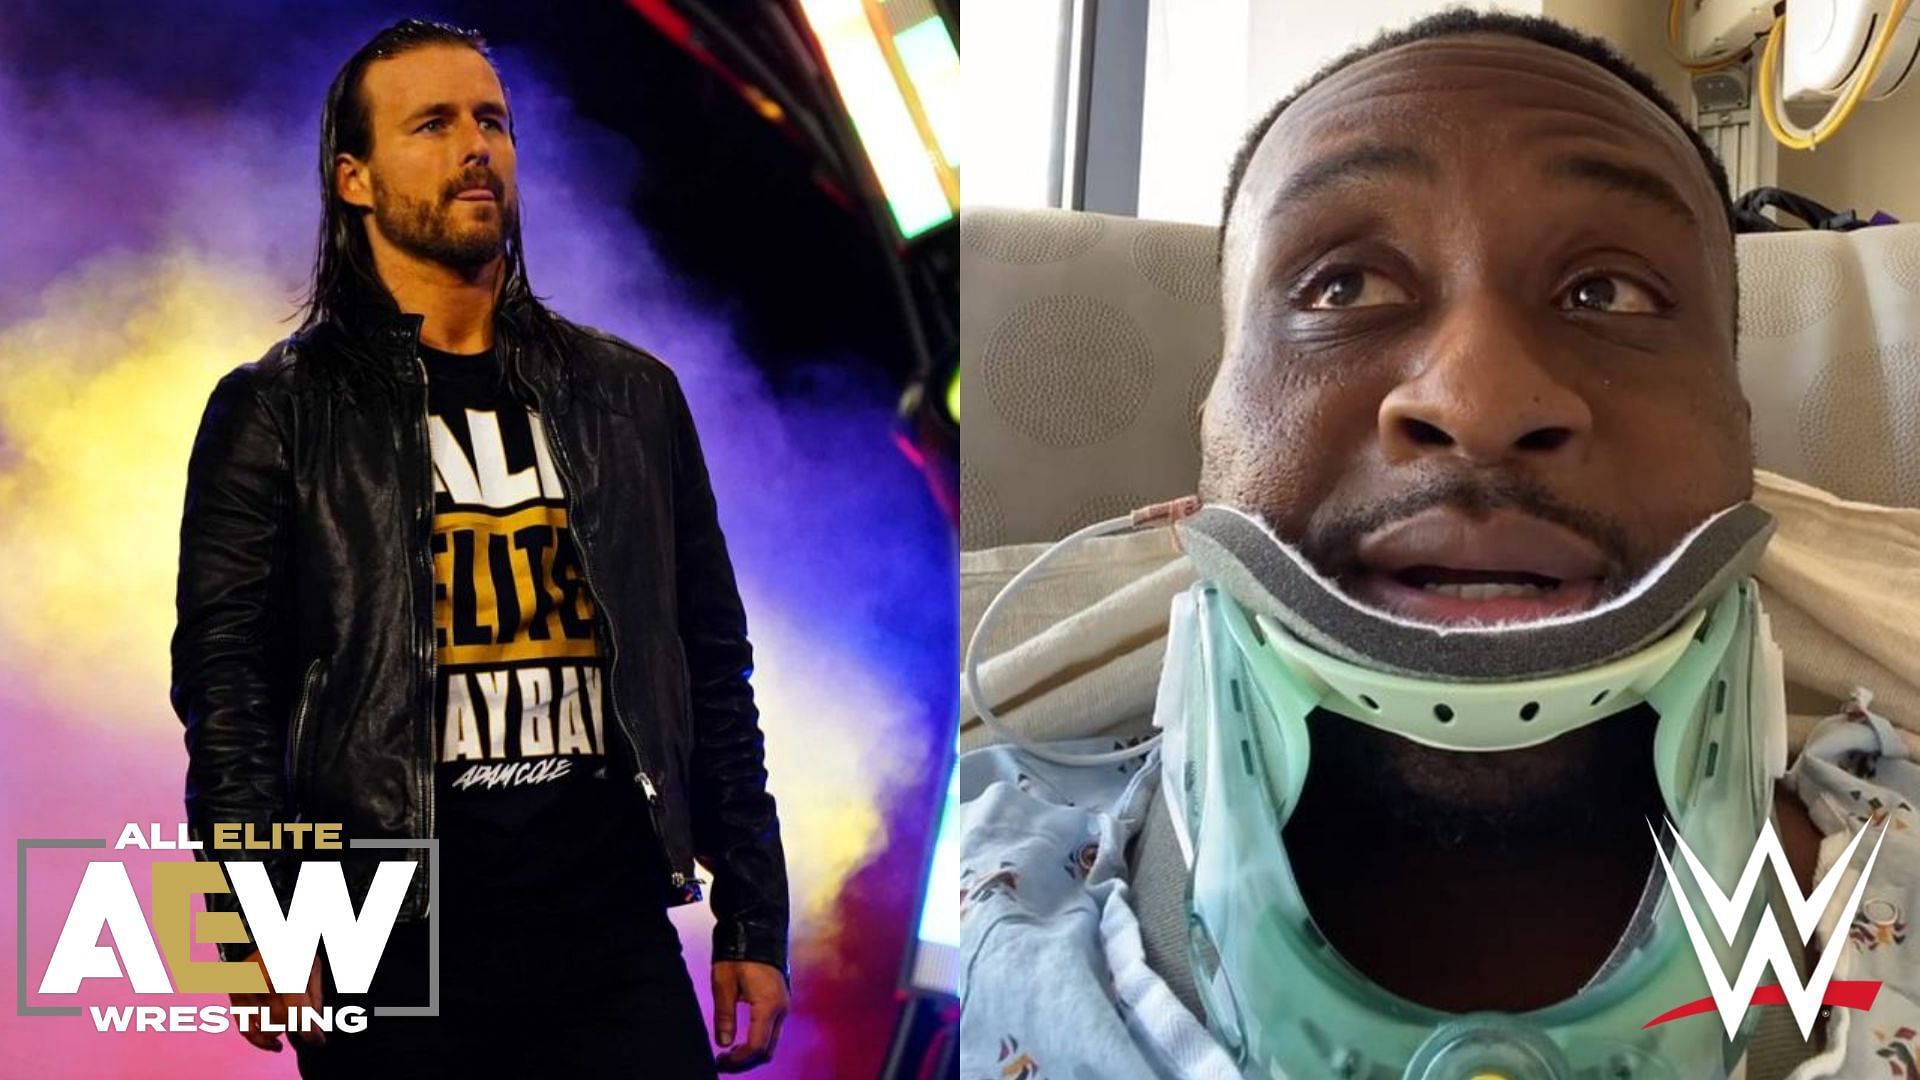 Big E and Adam Cole have suffered career-threatening injuries this year